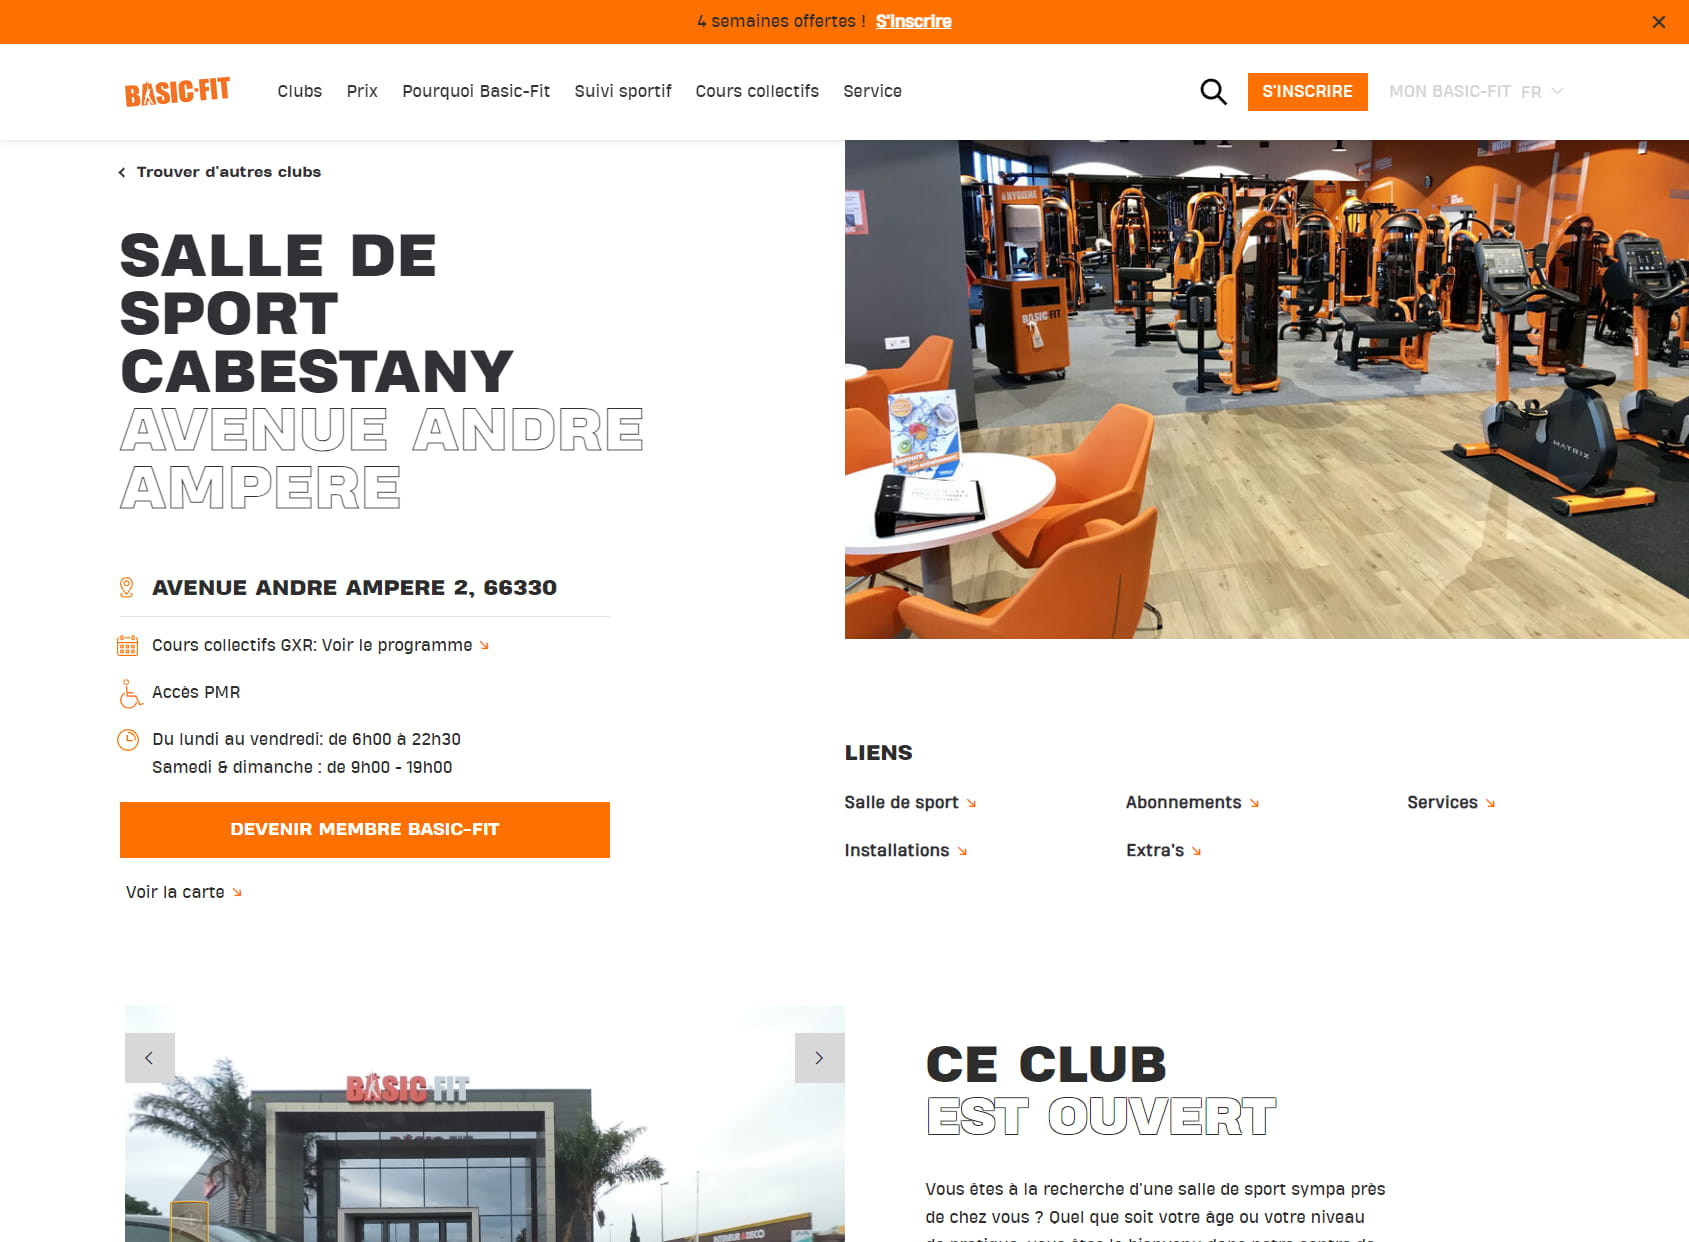 Basic-Fit Cabestany Avenue Andre Ampere